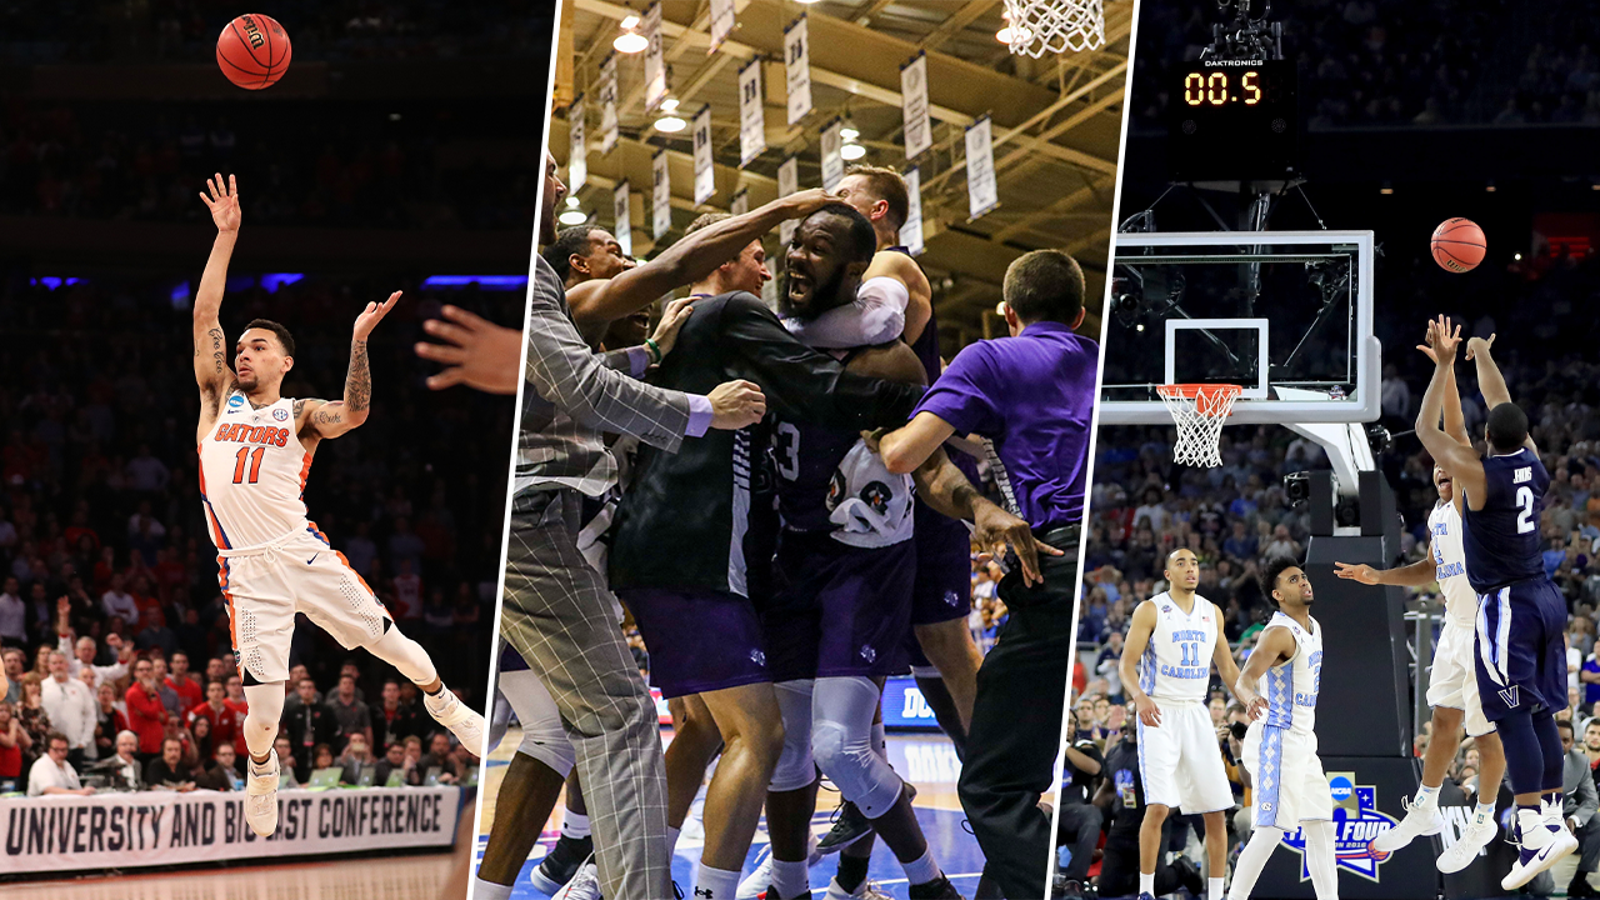 Top 5 College Basketball Buzzer Beaters